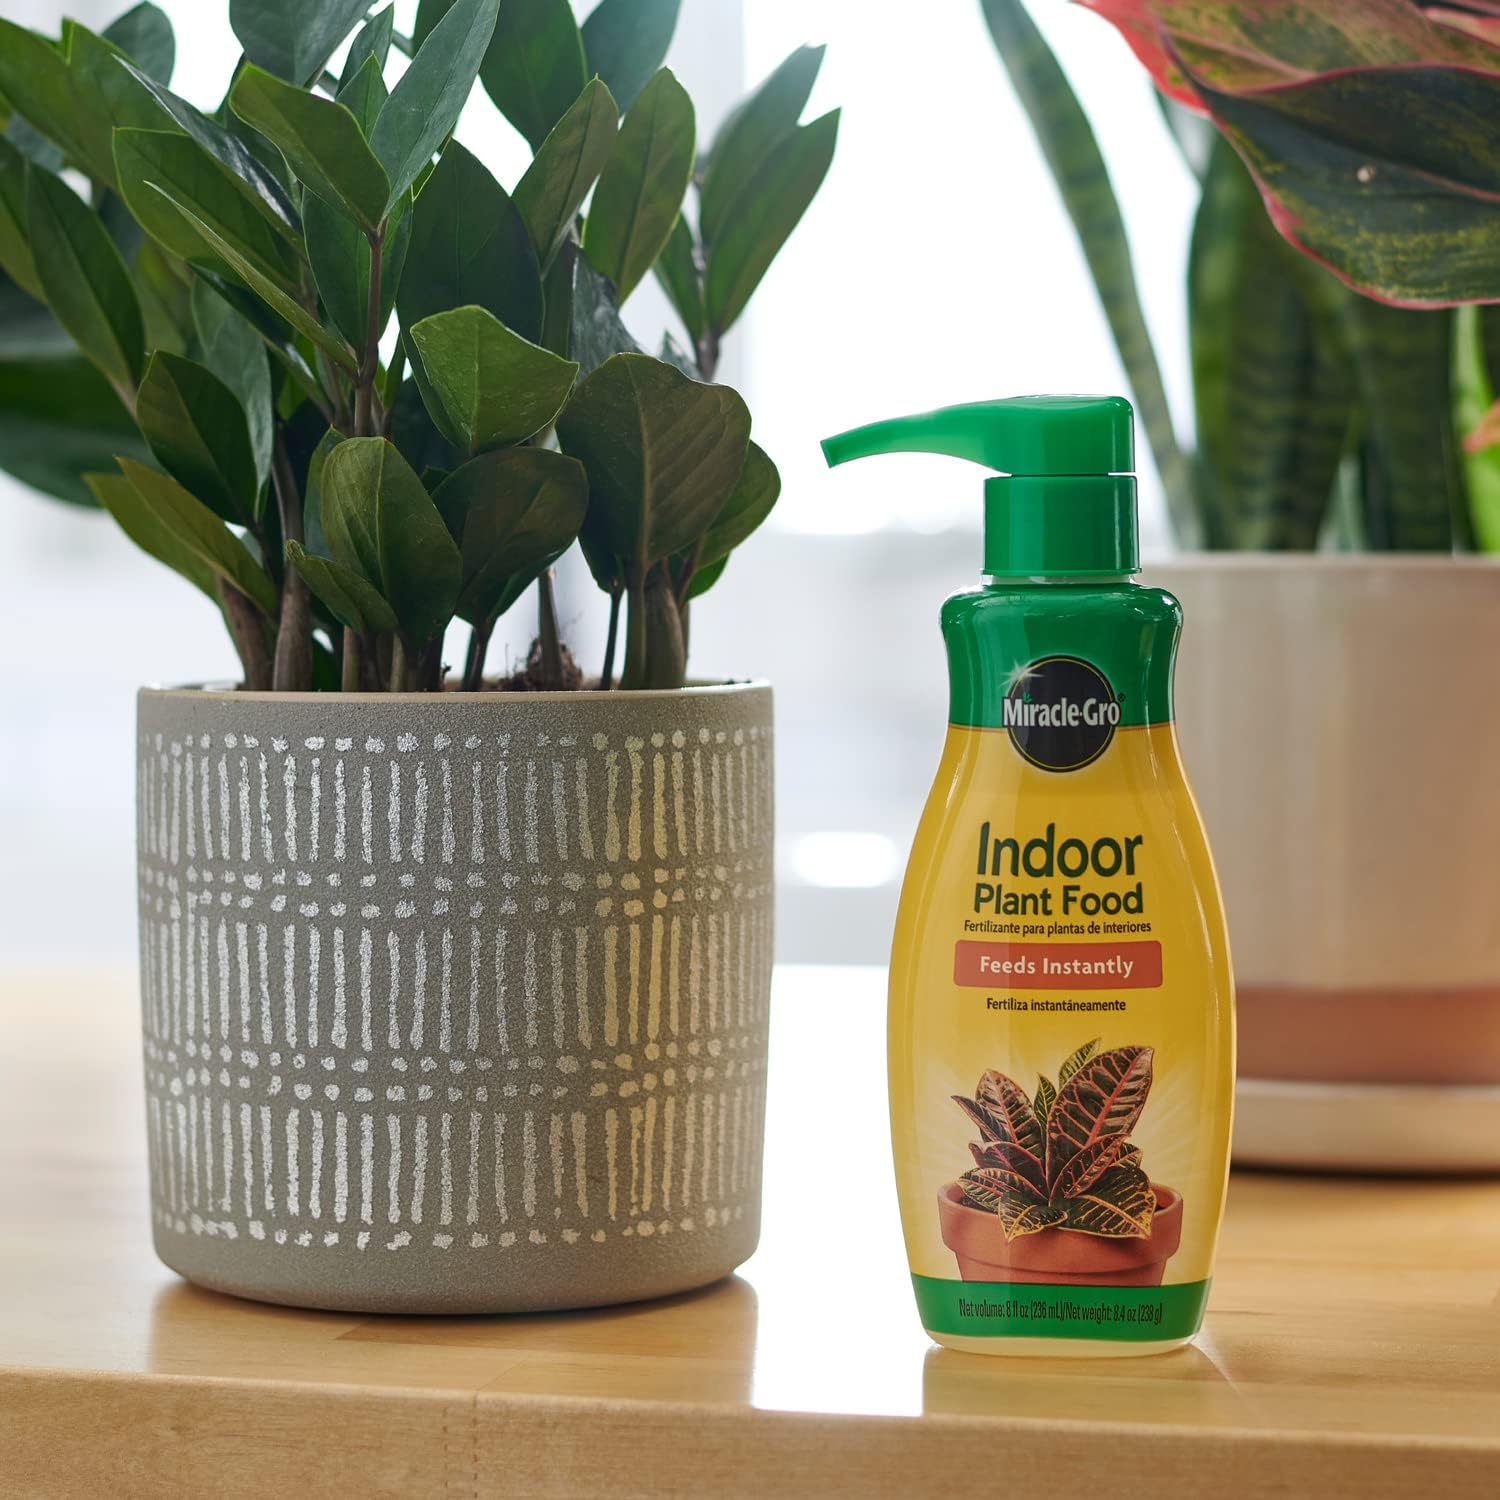 Miracle-Gro Indoor Plant Food, Liquid Fertilizer for All Types of Plants In Small or Large Indoor Pots, 8 oz.